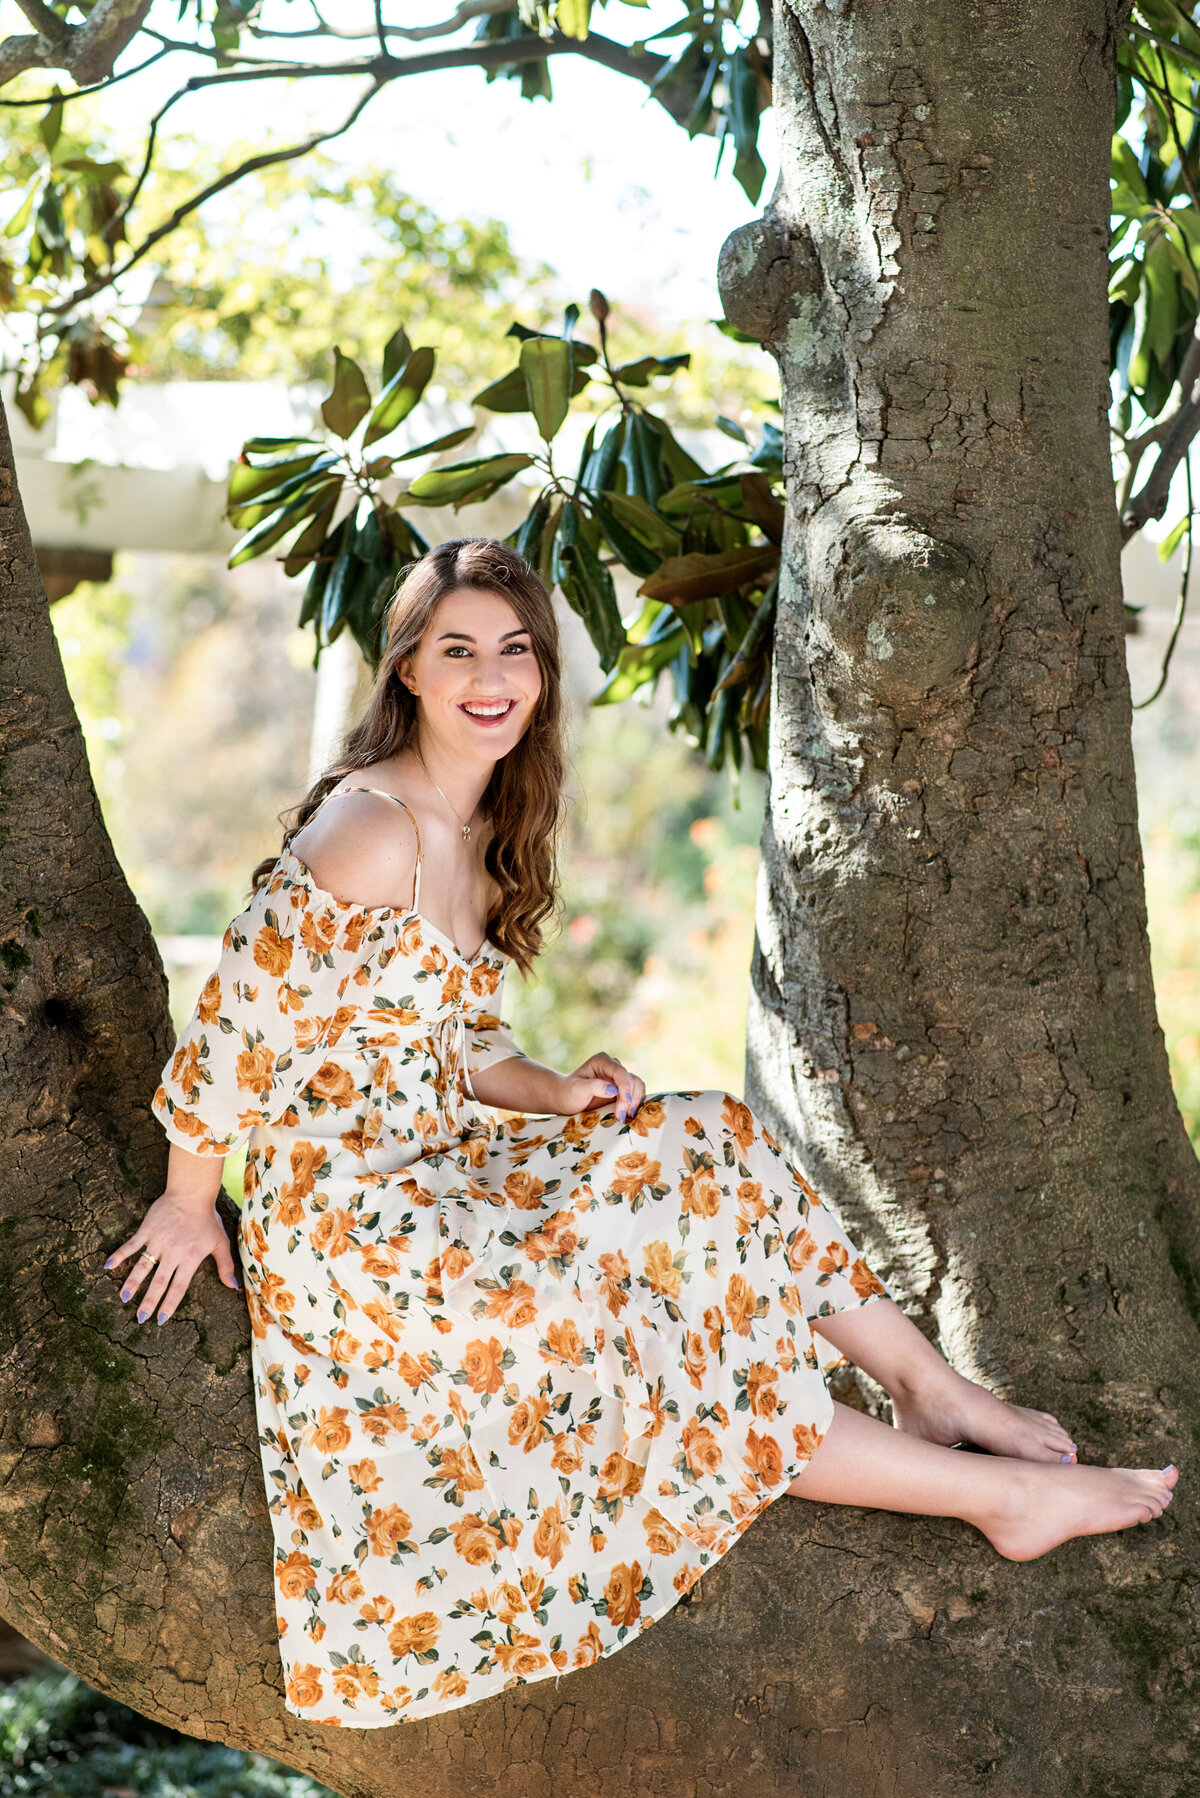 RVA senior girl sits in a magnolia tree at Maymont Park wearing floral dress duringher senior portraits.